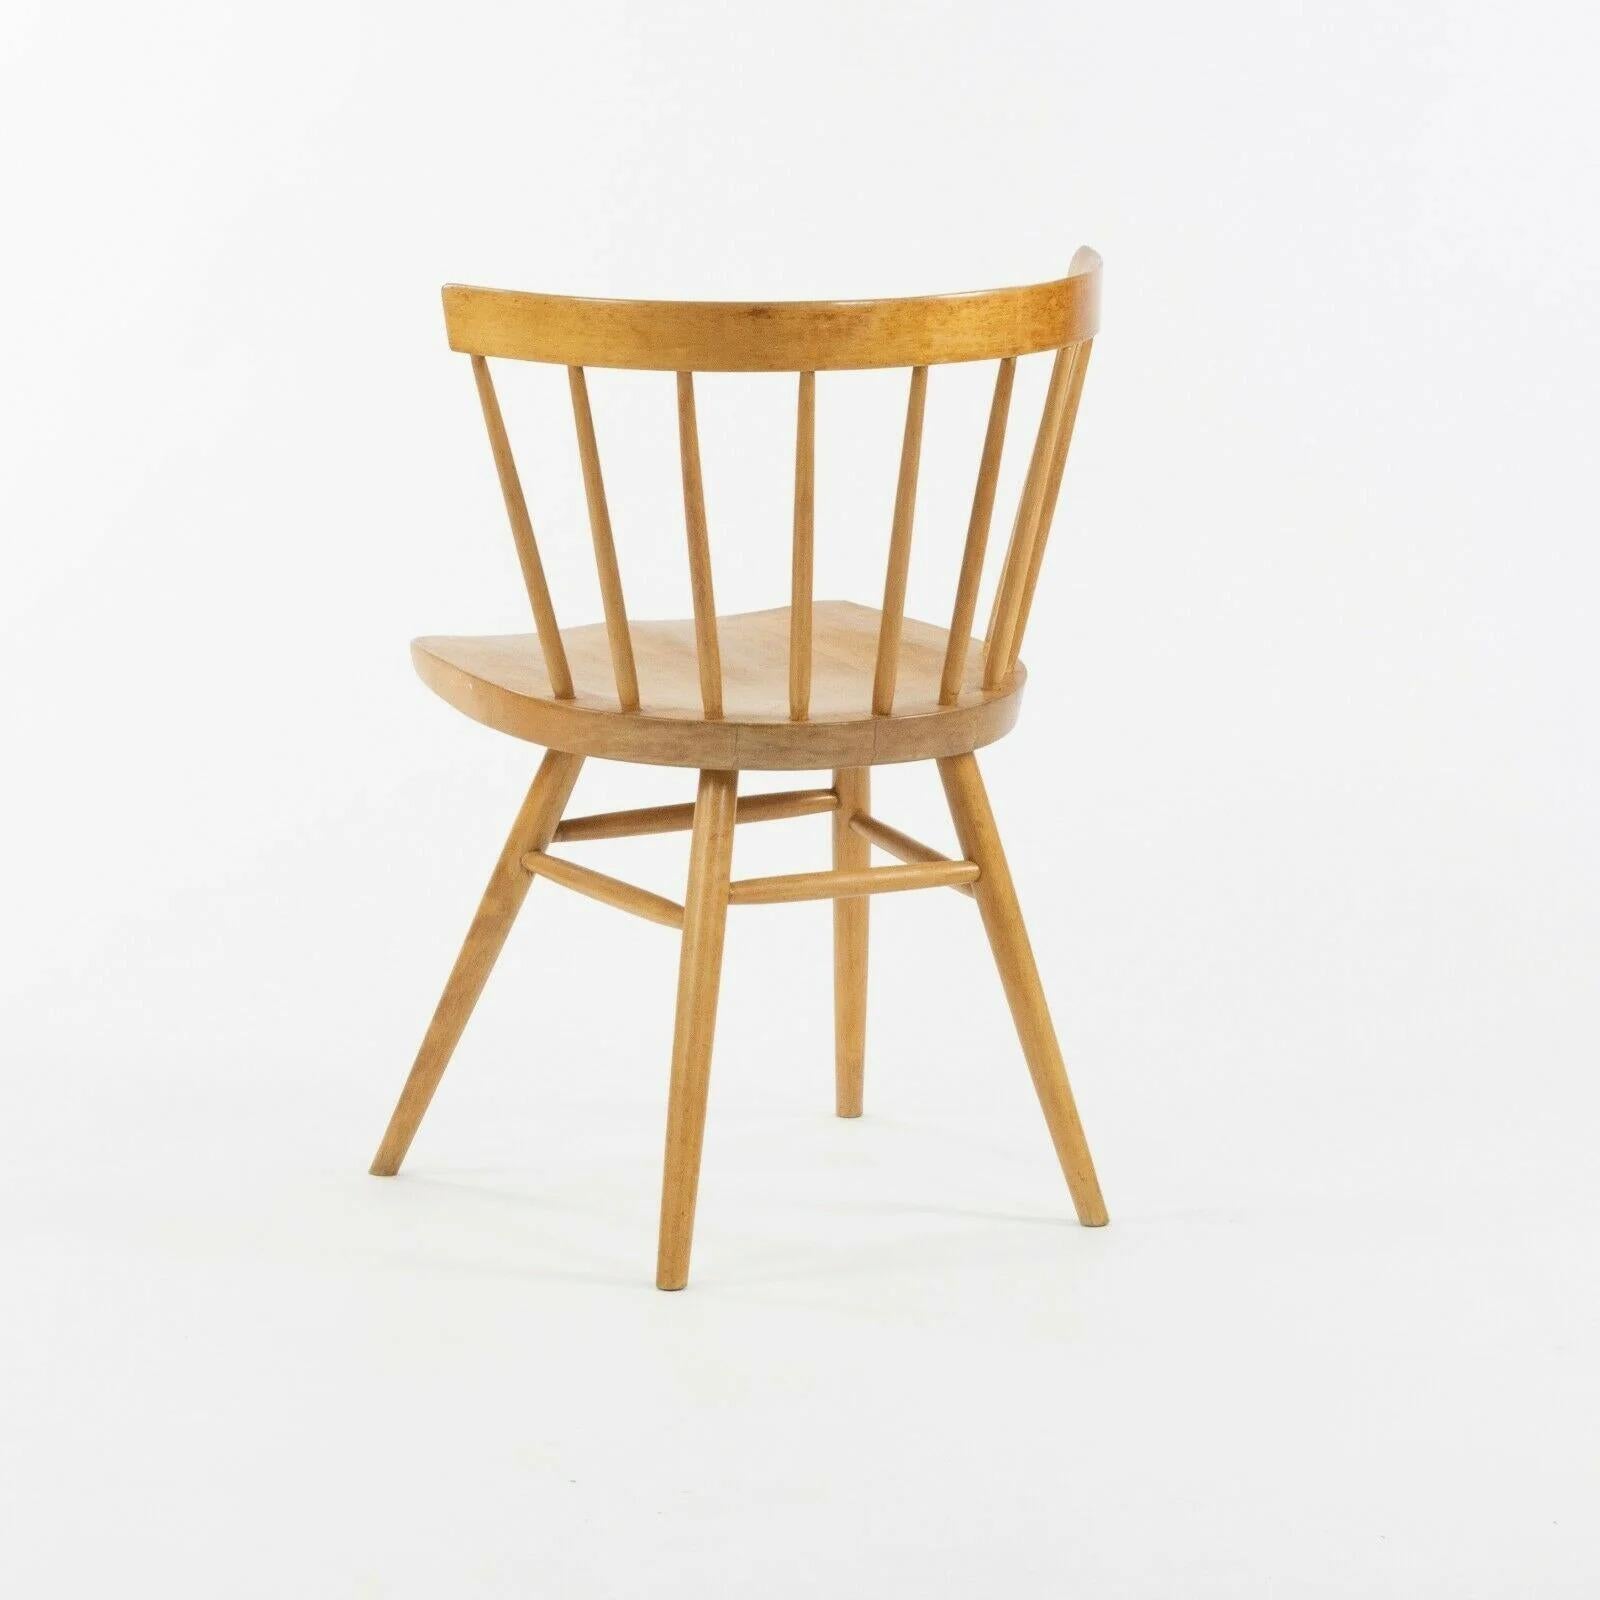 1947 George Nakashima for Knoll N19 Straight Chair in Natural Birch In Good Condition For Sale In Philadelphia, PA